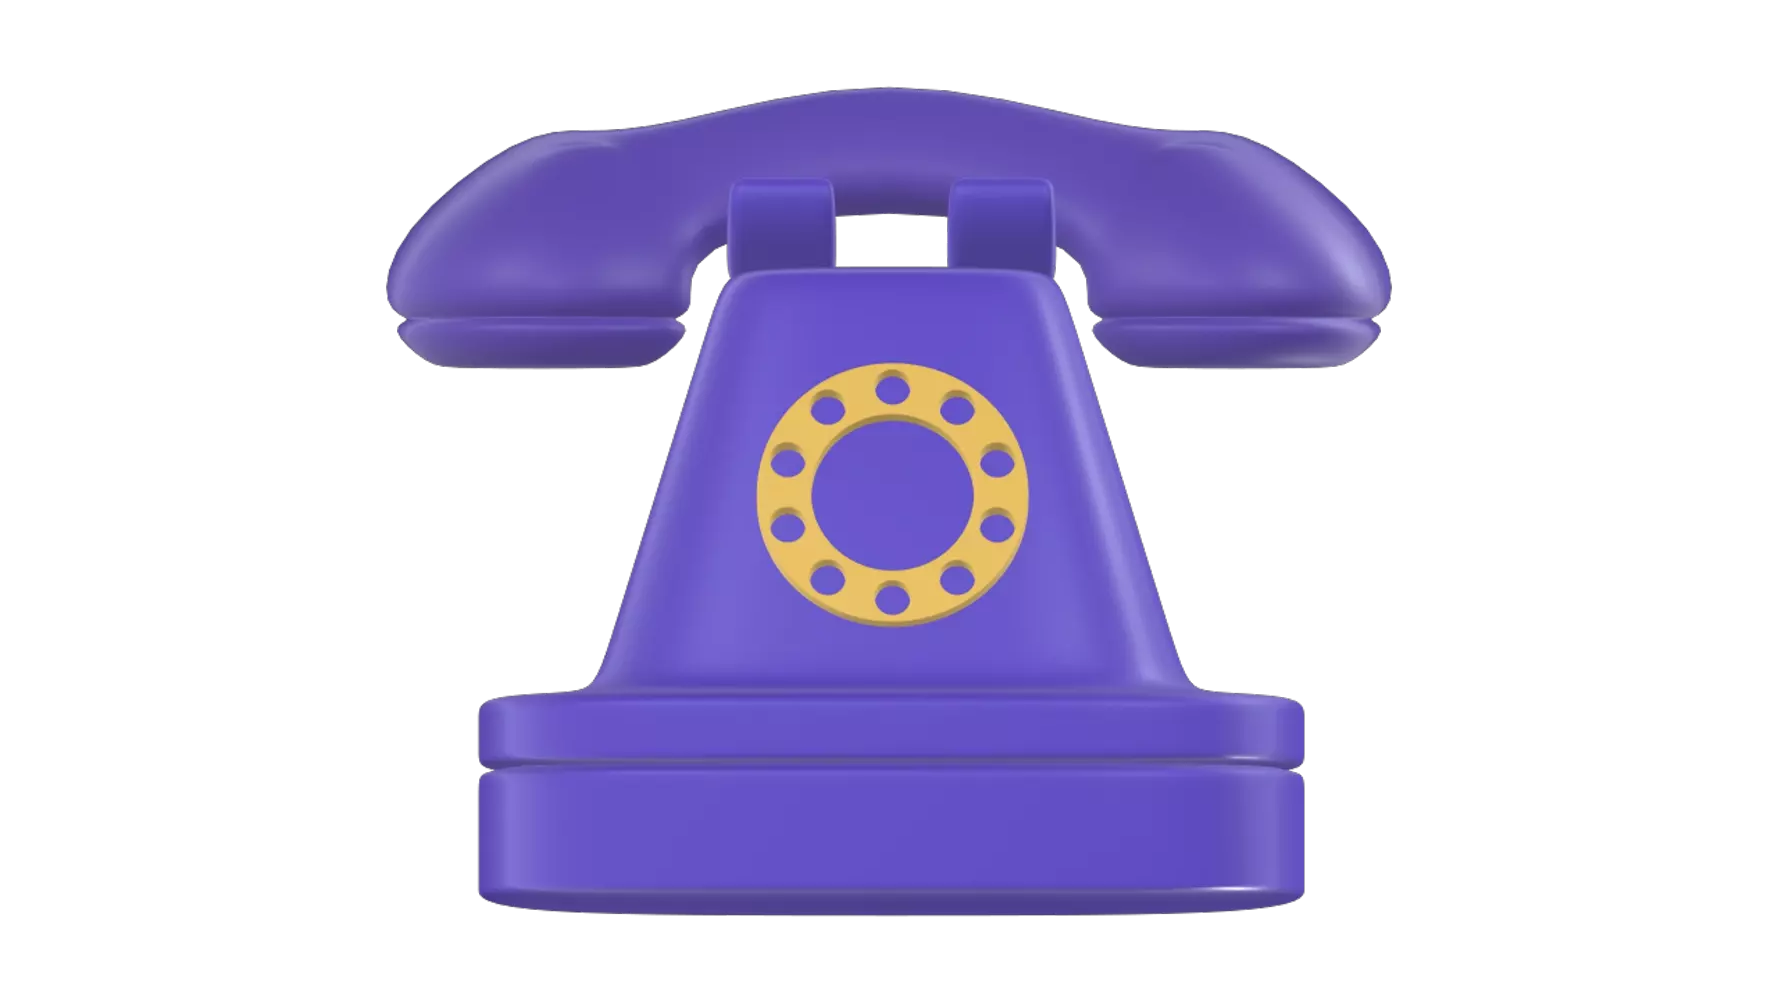 Old Telephone 3D Graphic